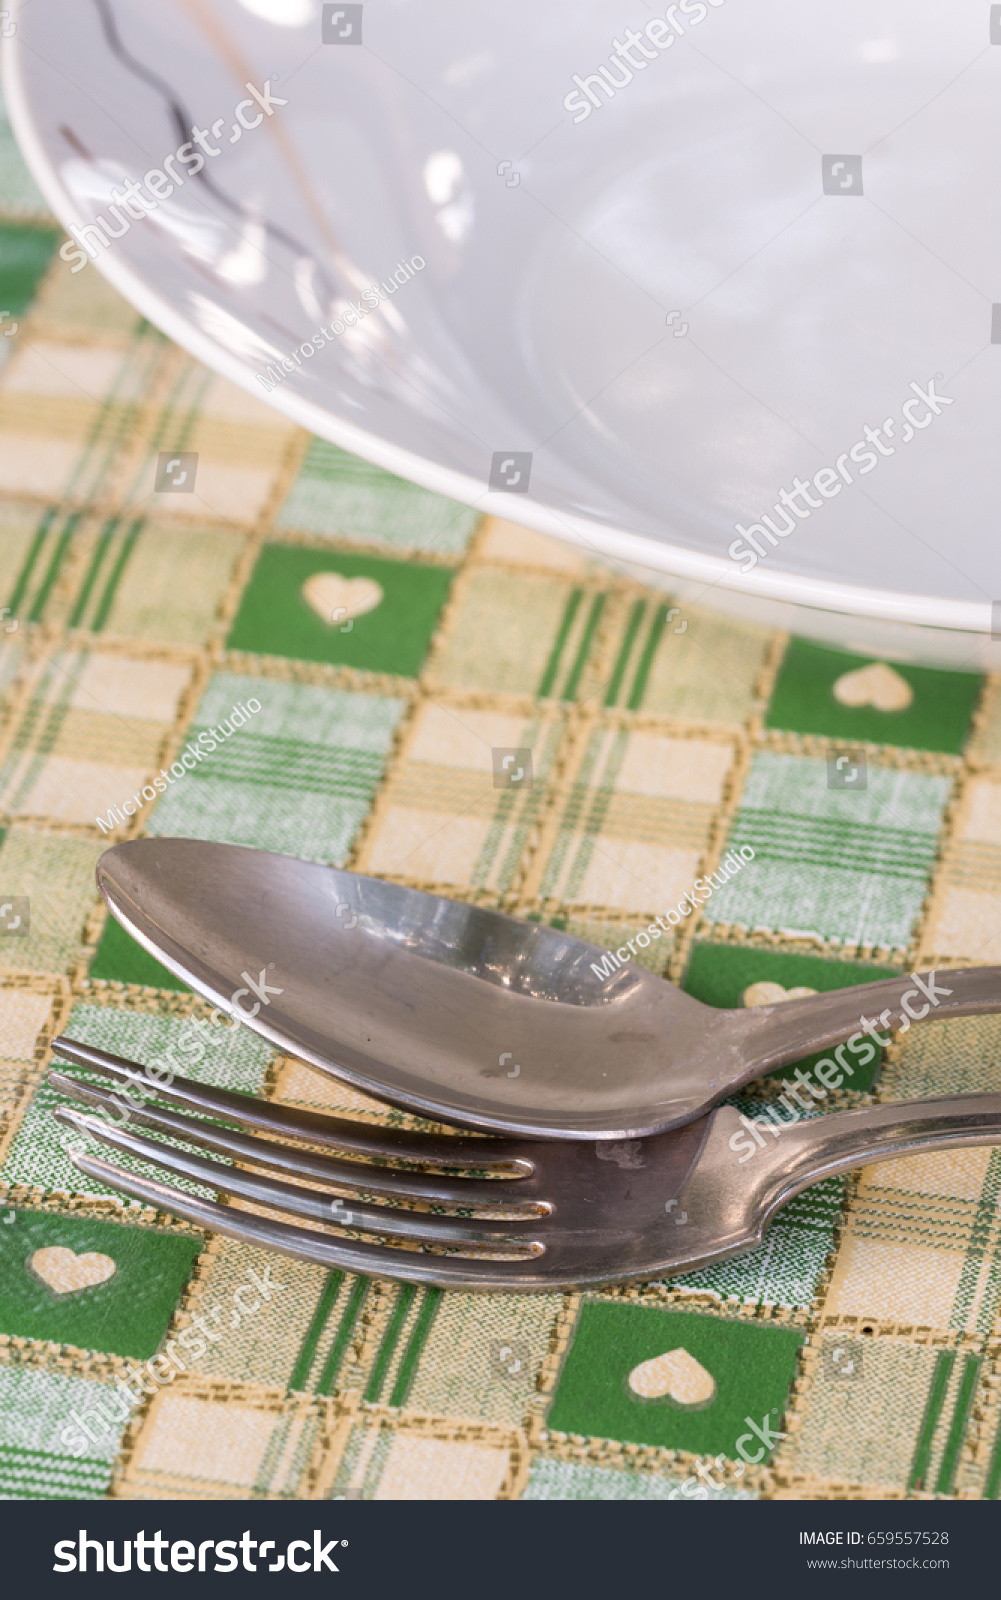 Metal spoon and fork beside plate on the served table. #659557528